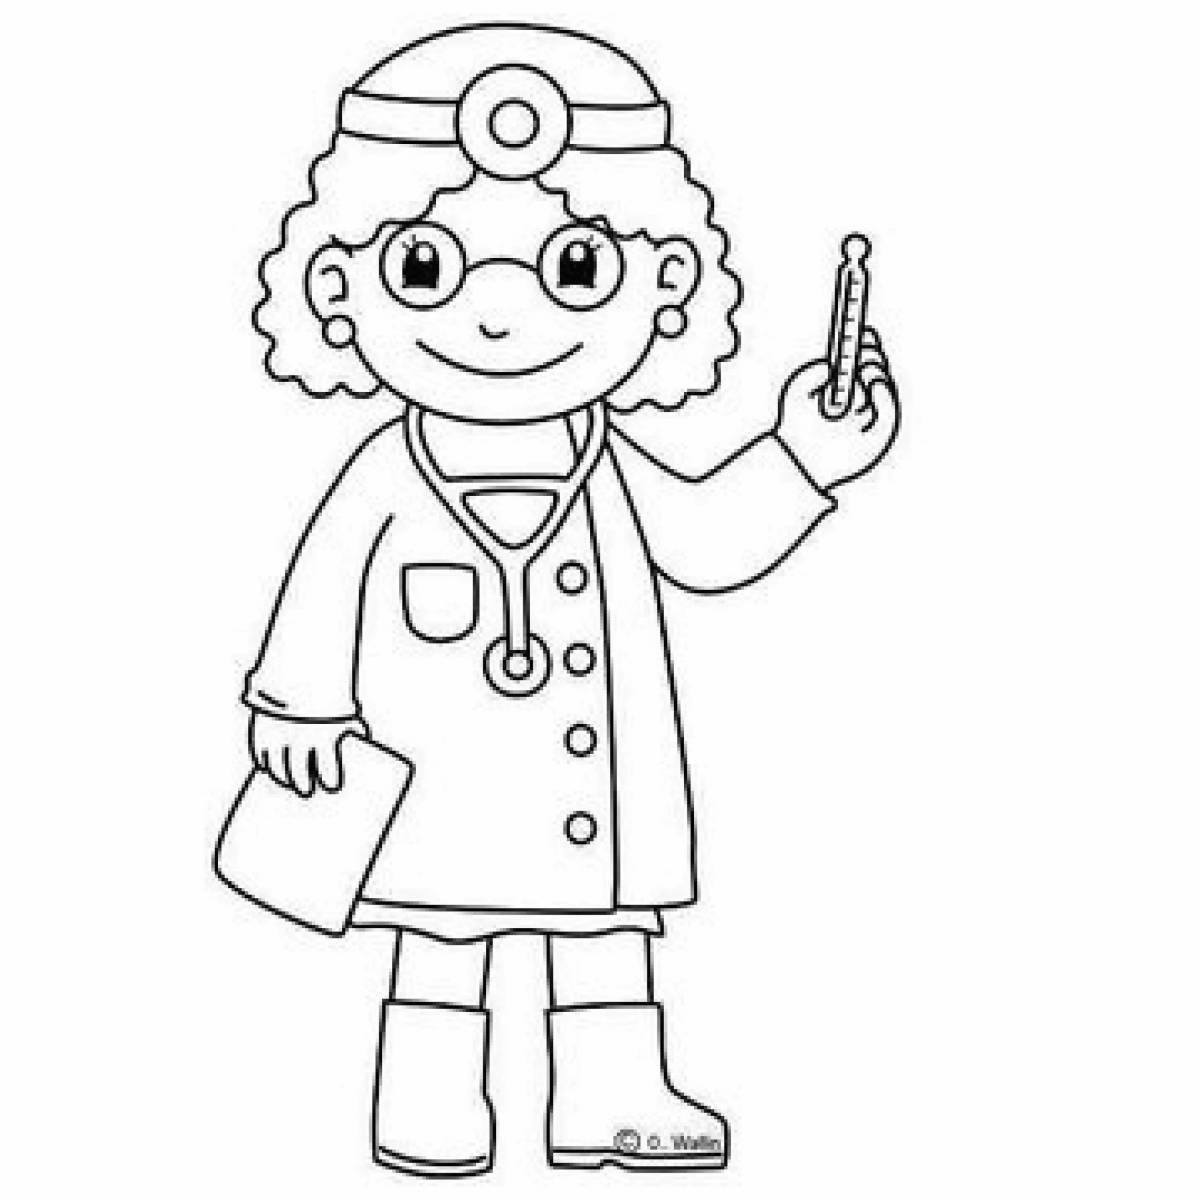 Coloring professions for kids